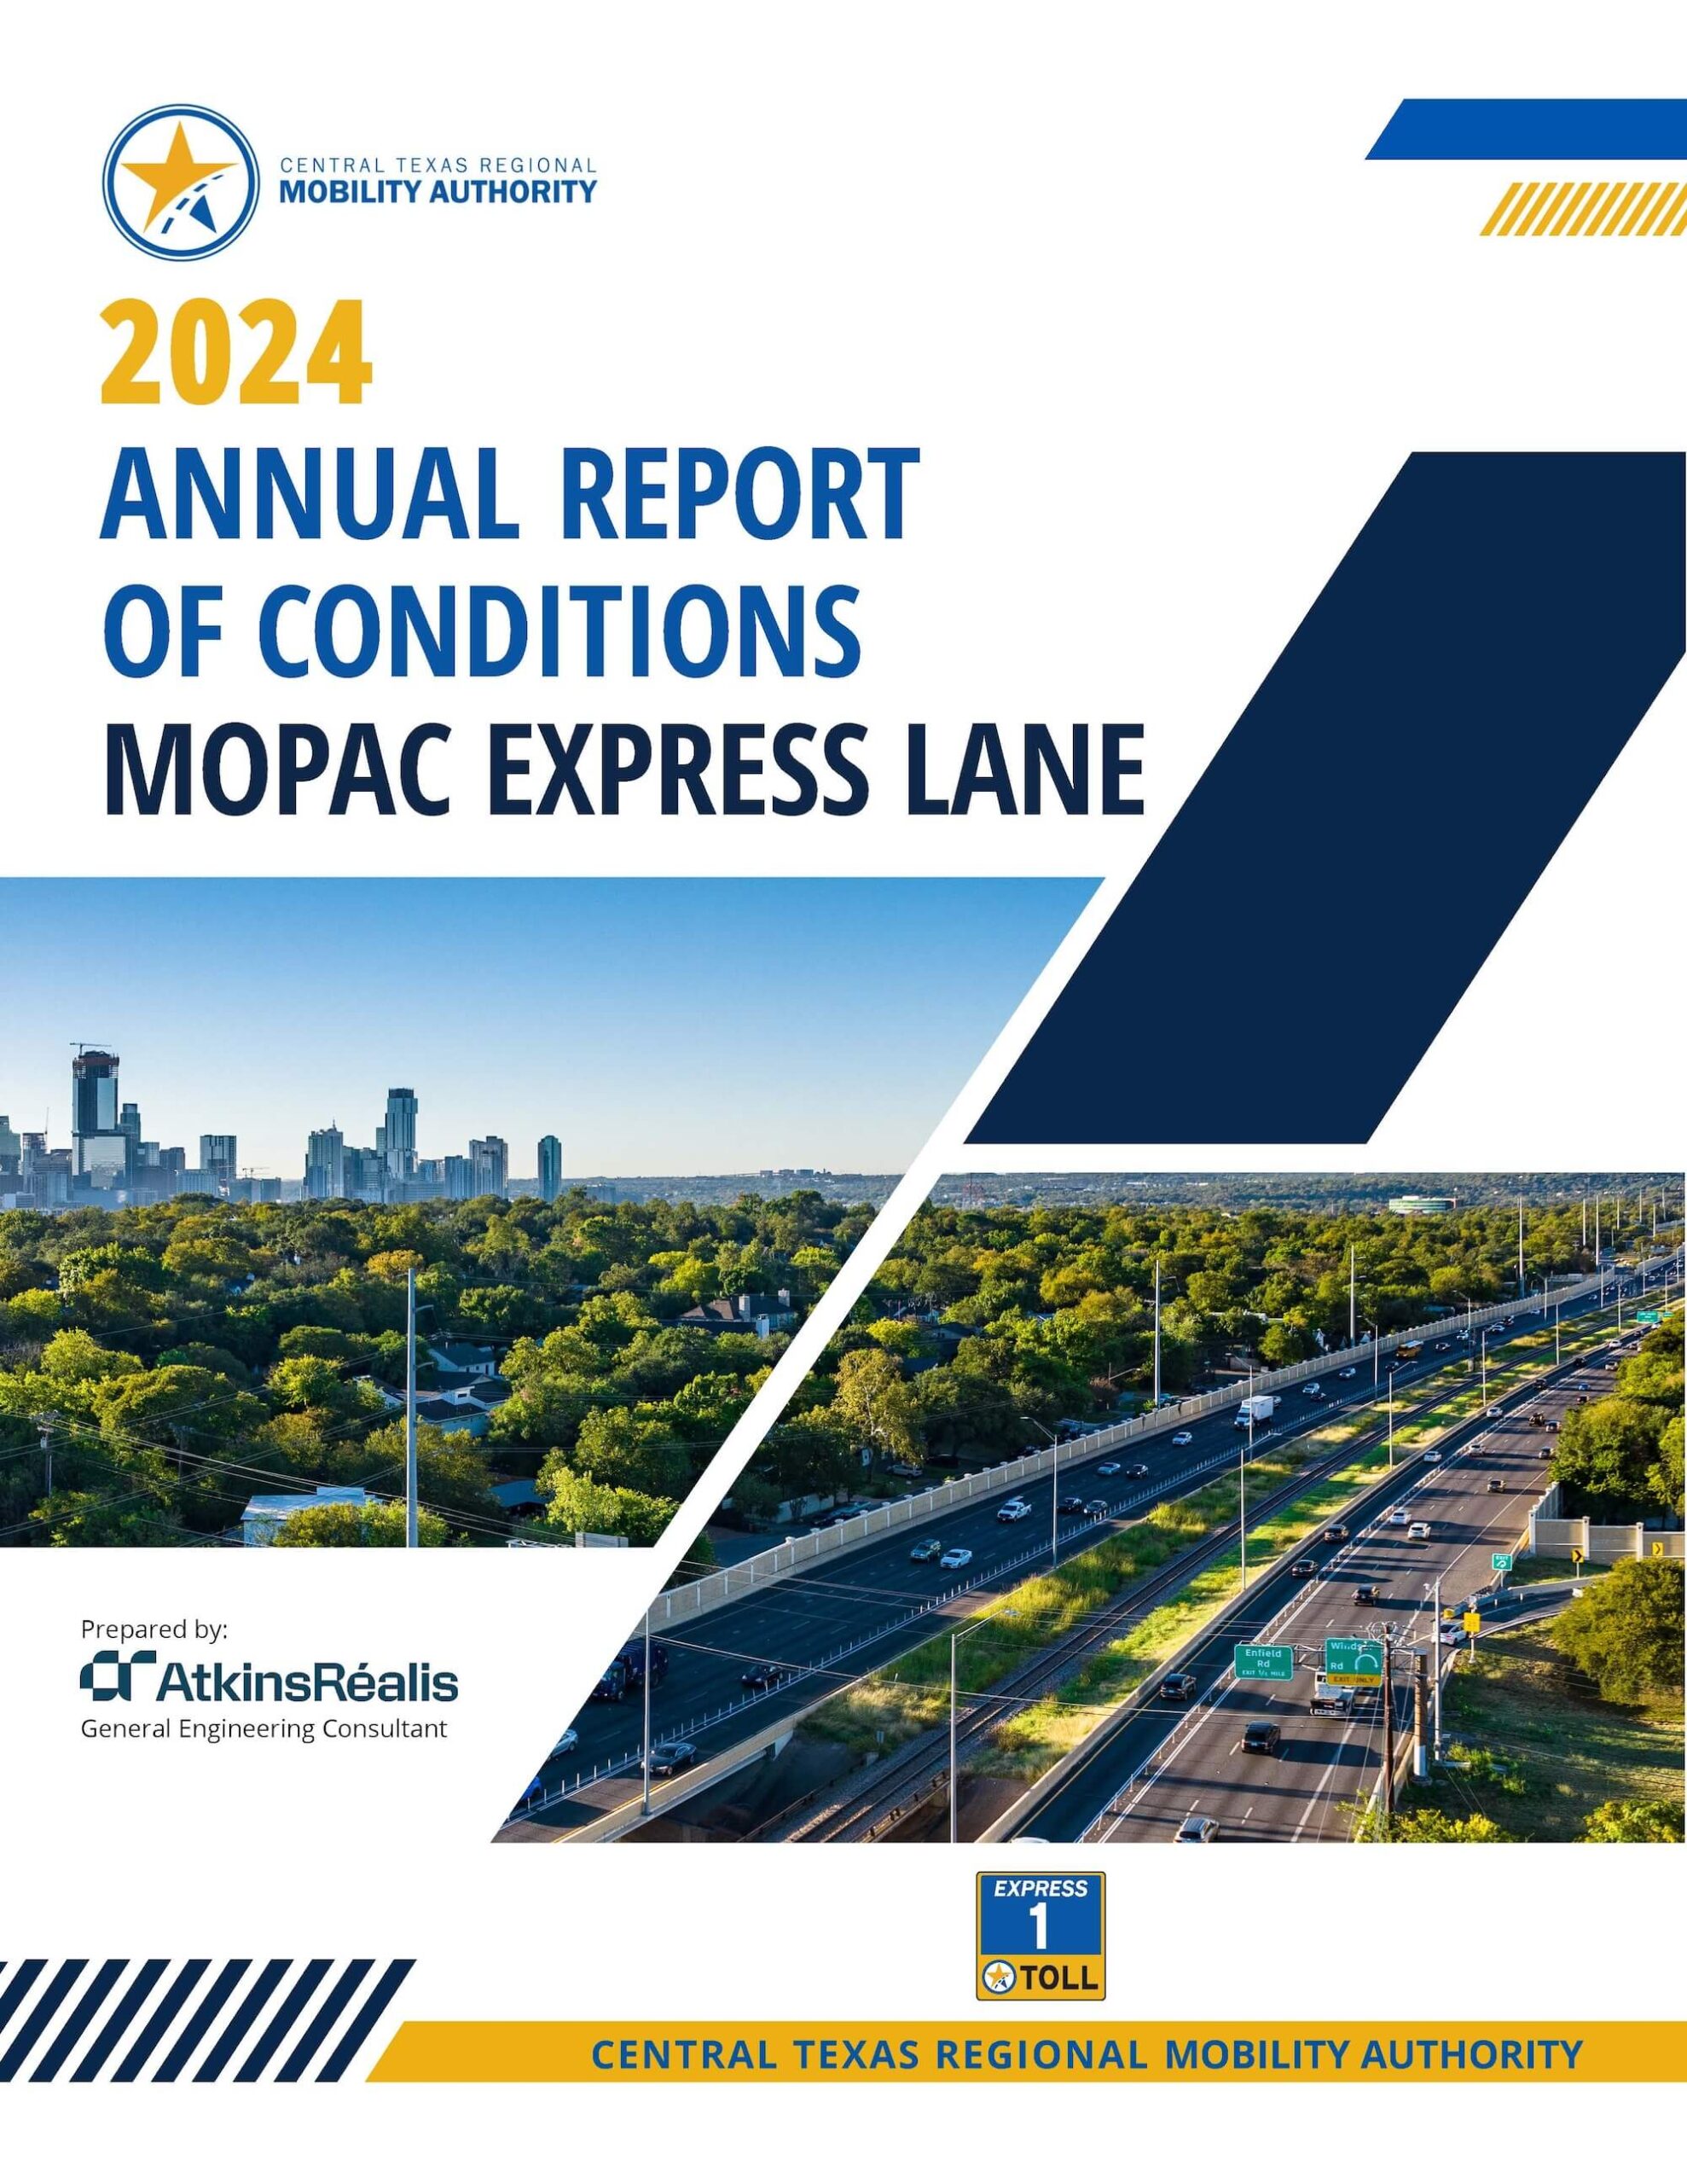 2024 Annual Report of Conditions: MoPac Express Lane Cover